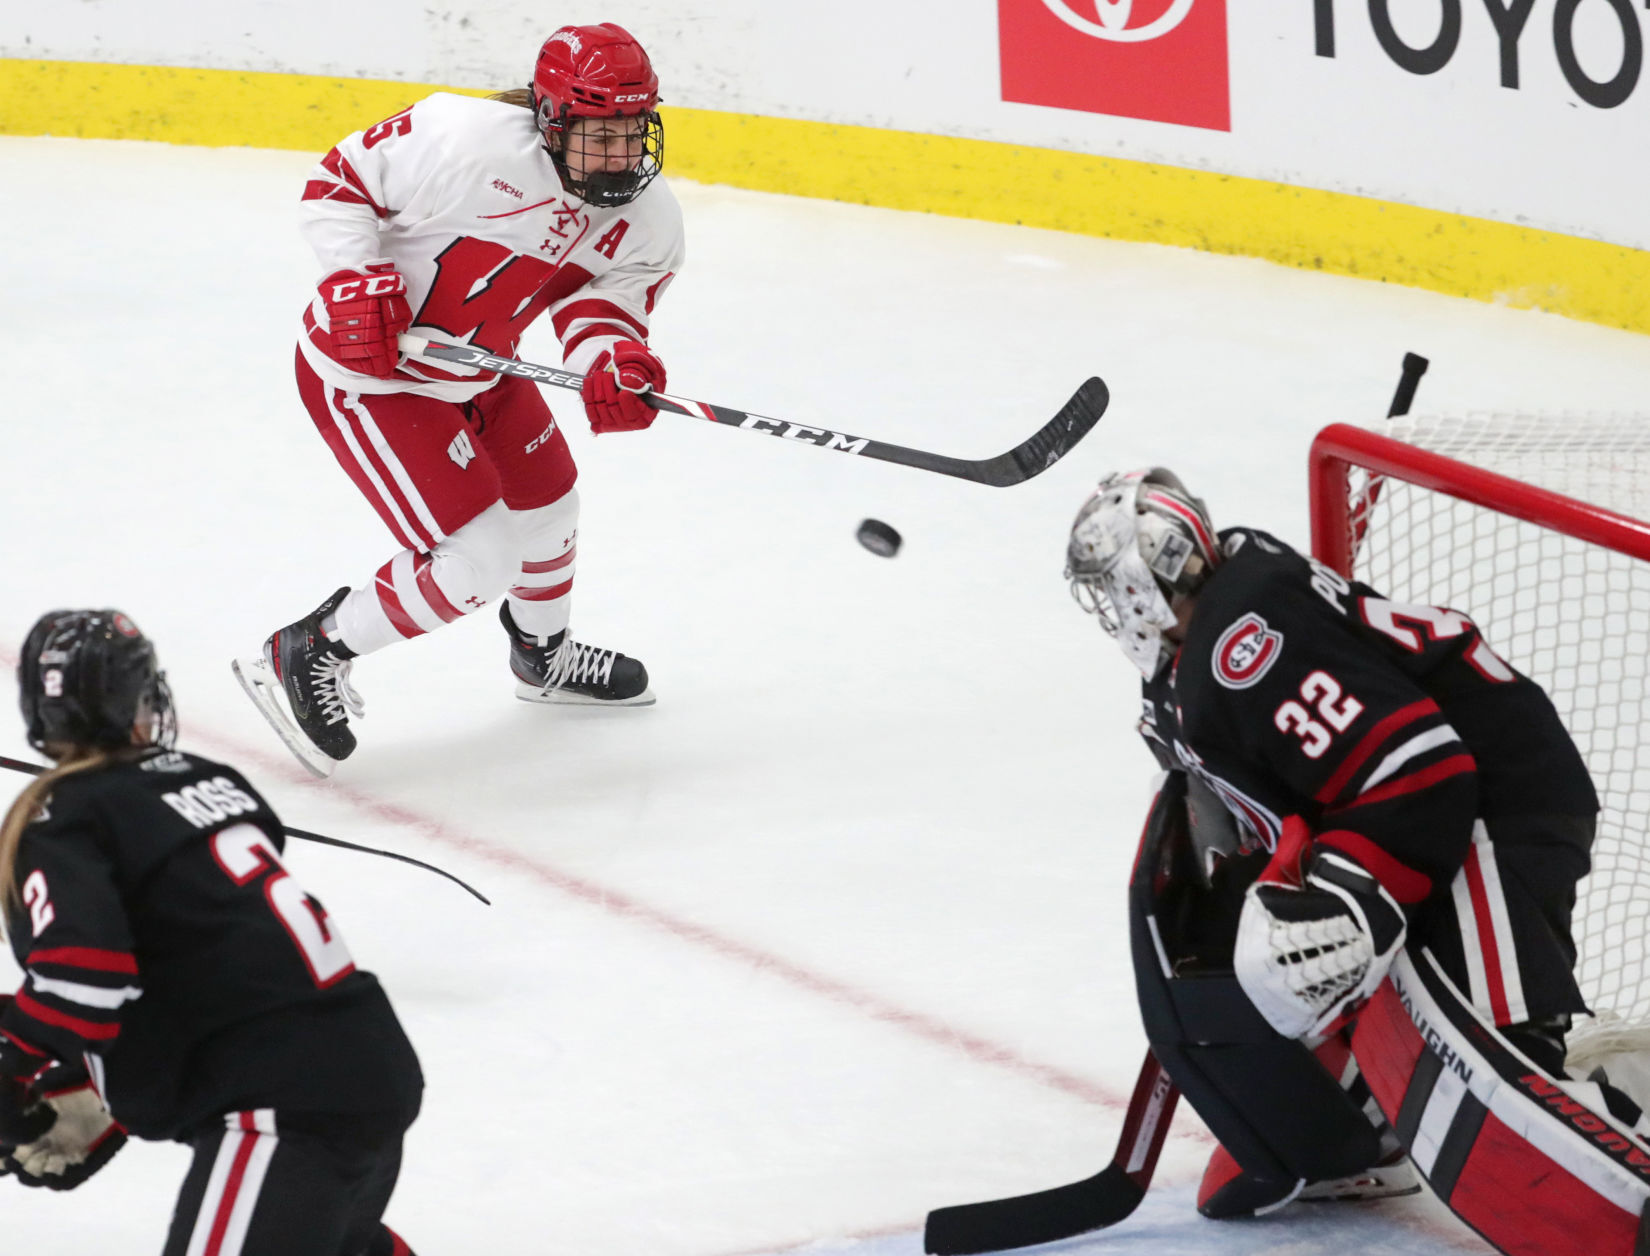 Heres how Sarah Wozniewicz powered her way to a memorable opening month with the Badgers